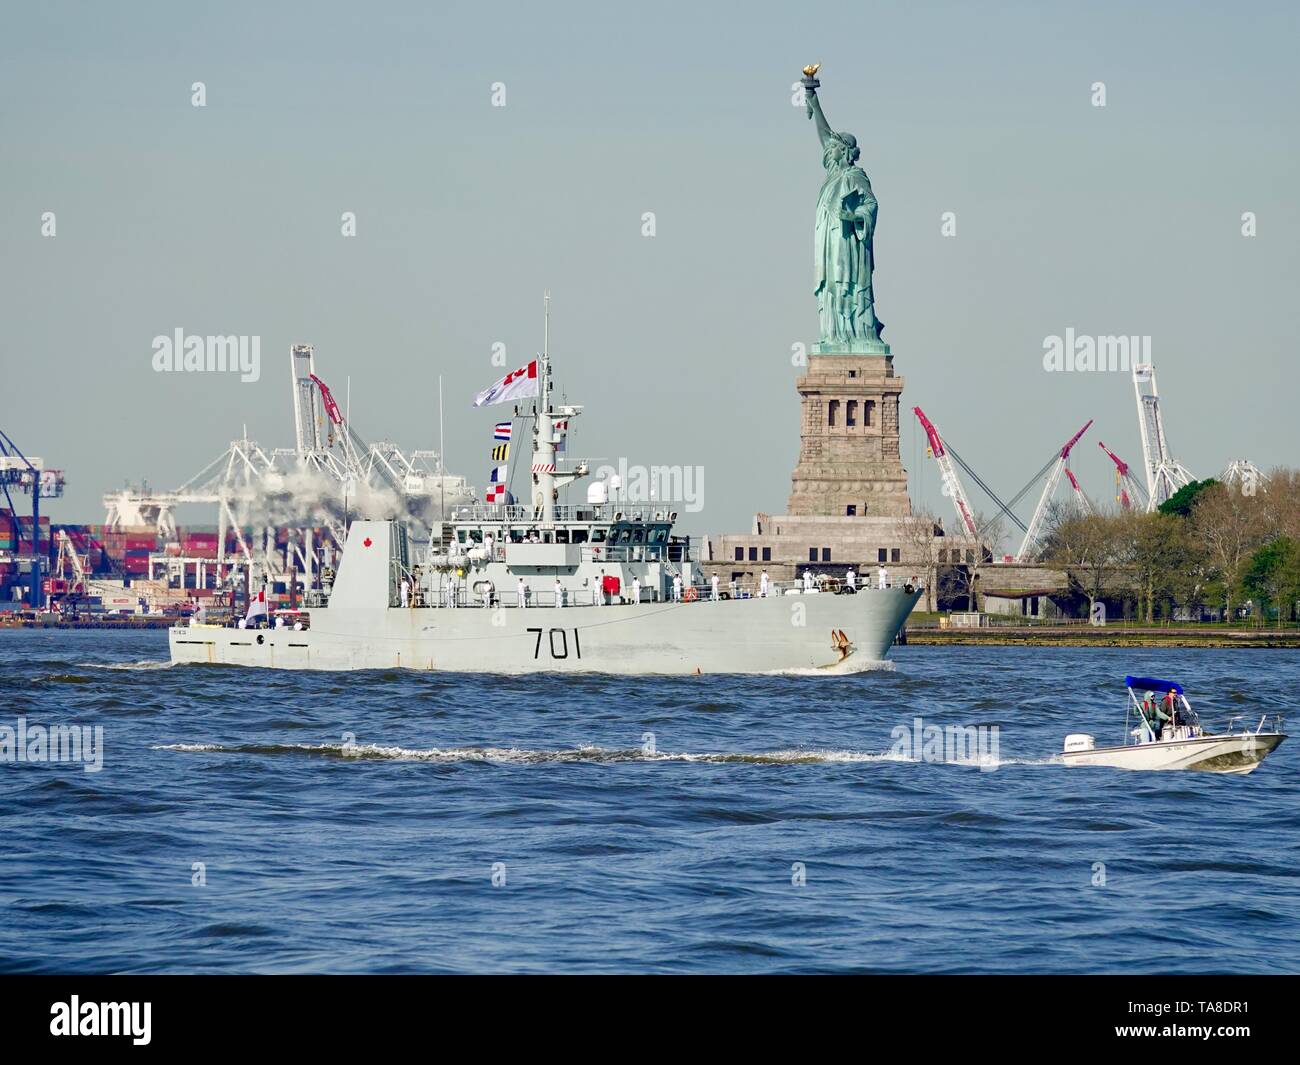 HMCS Glace Bay, Royal Canadian Navy Maritime Coastal Defence Vessel, sailing in front of the Statue of Liberty, Fleet Week, New York, NY, USA Stock Photo